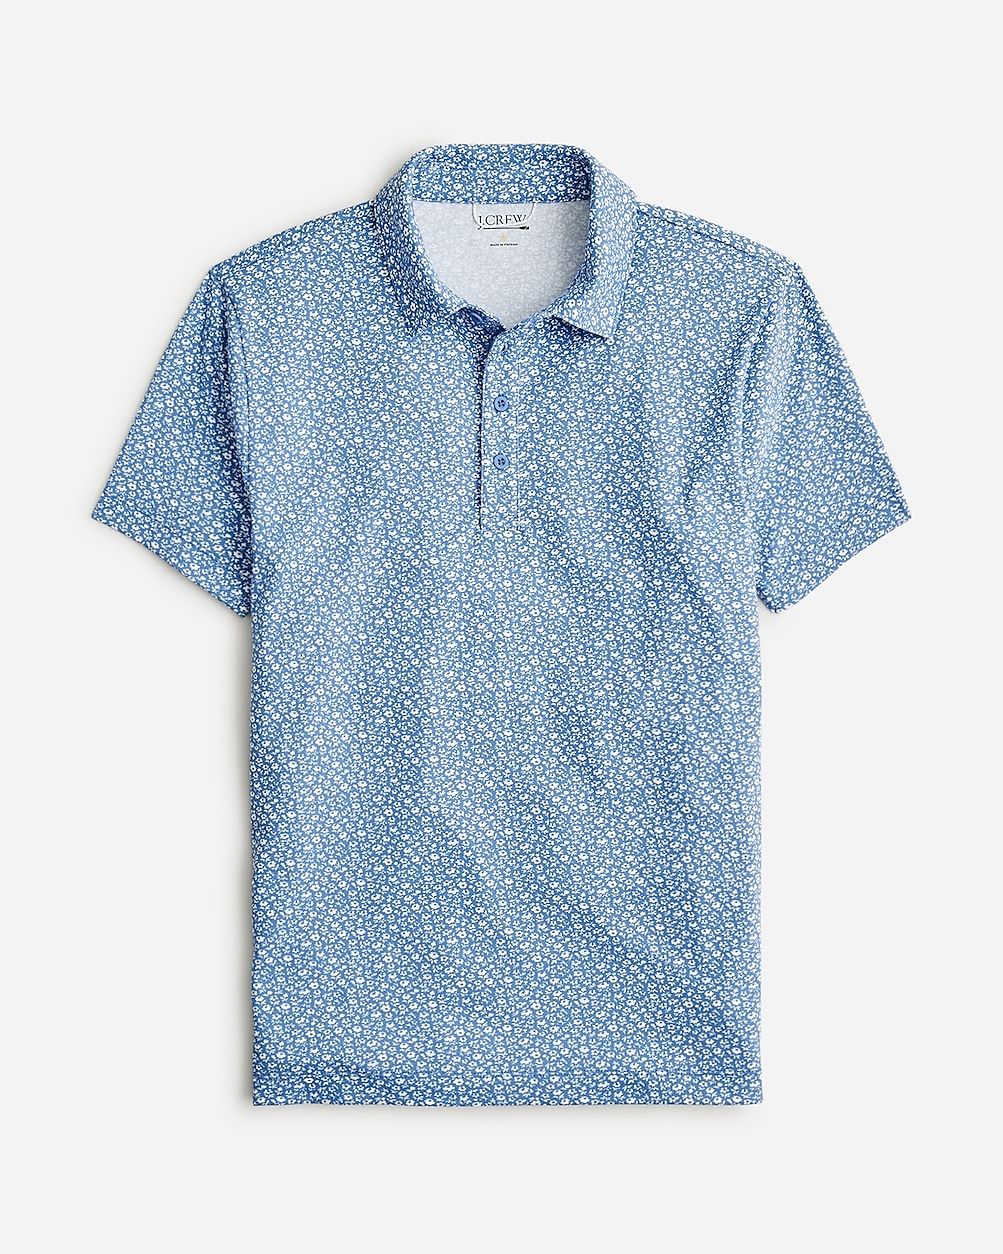 Performance polo shirt with COOLMAX® in print | J.Crew US